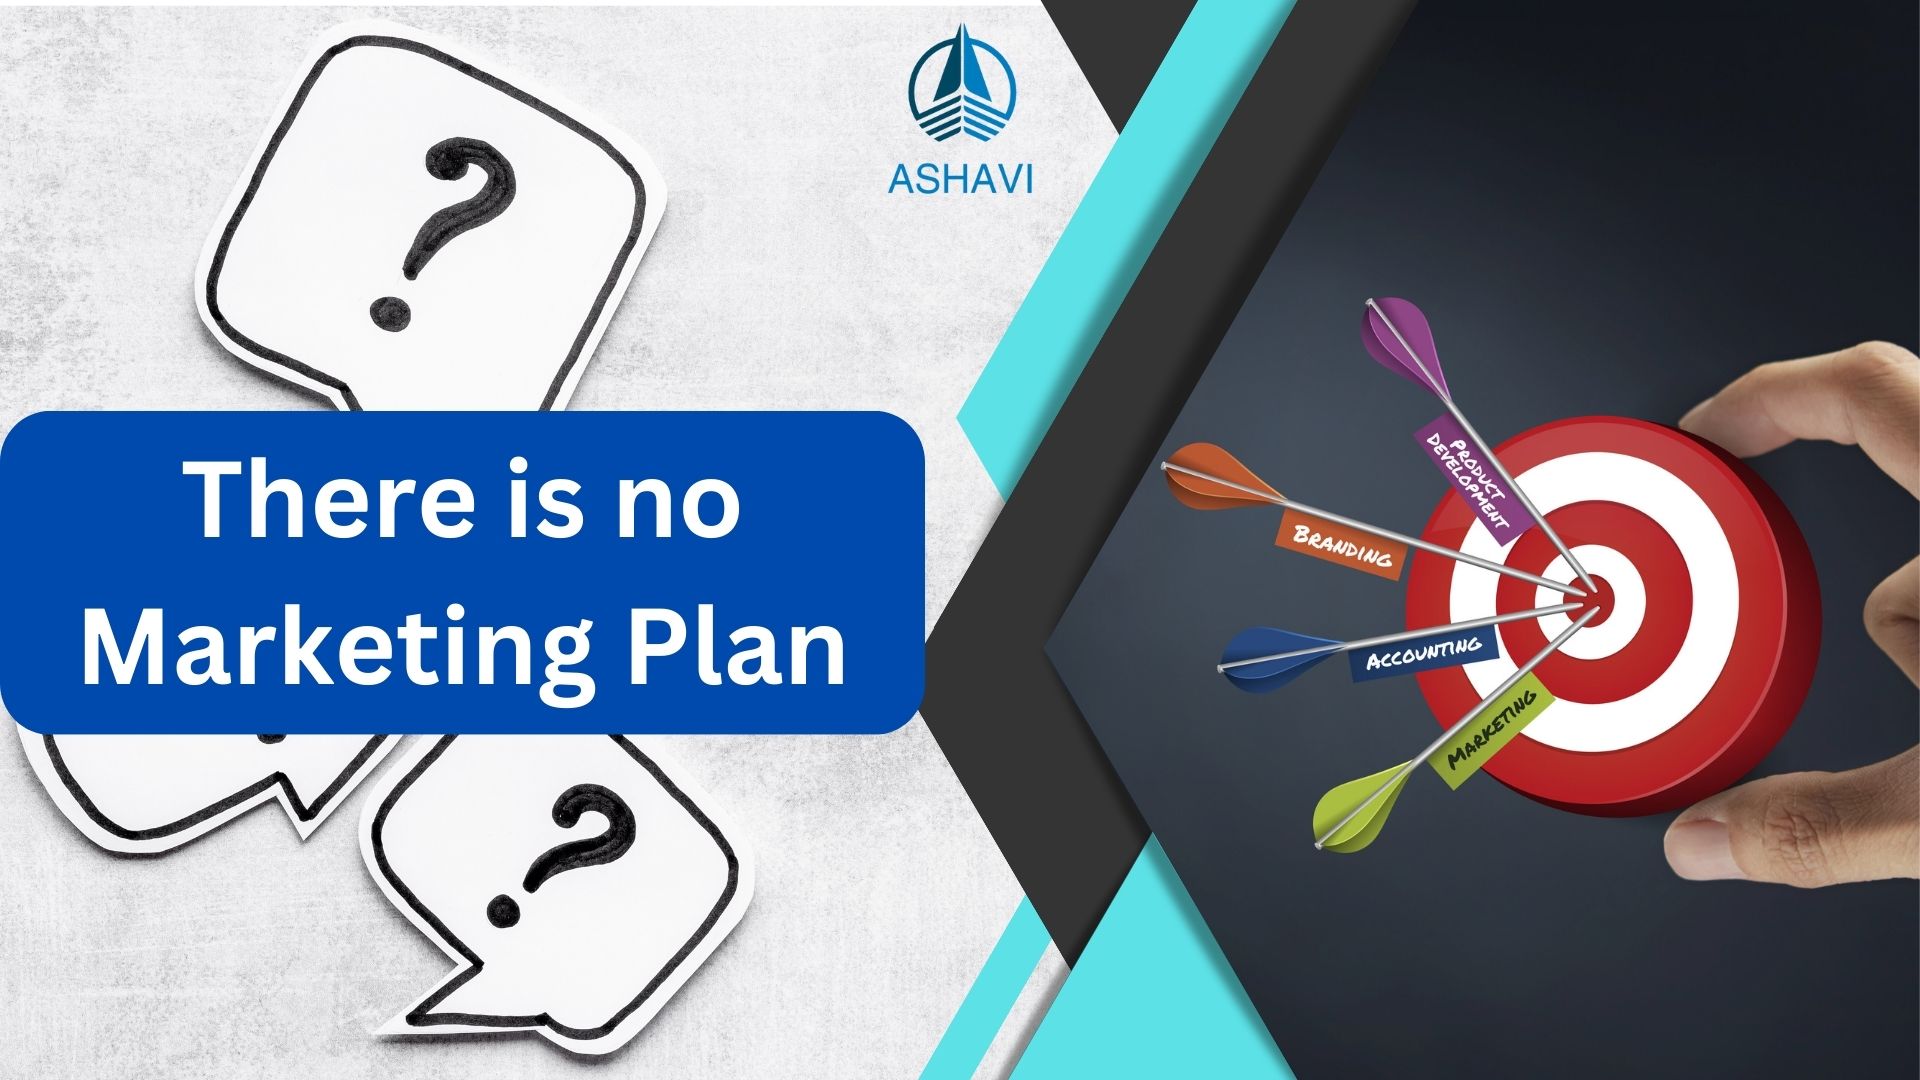 There is no Marketing Plan